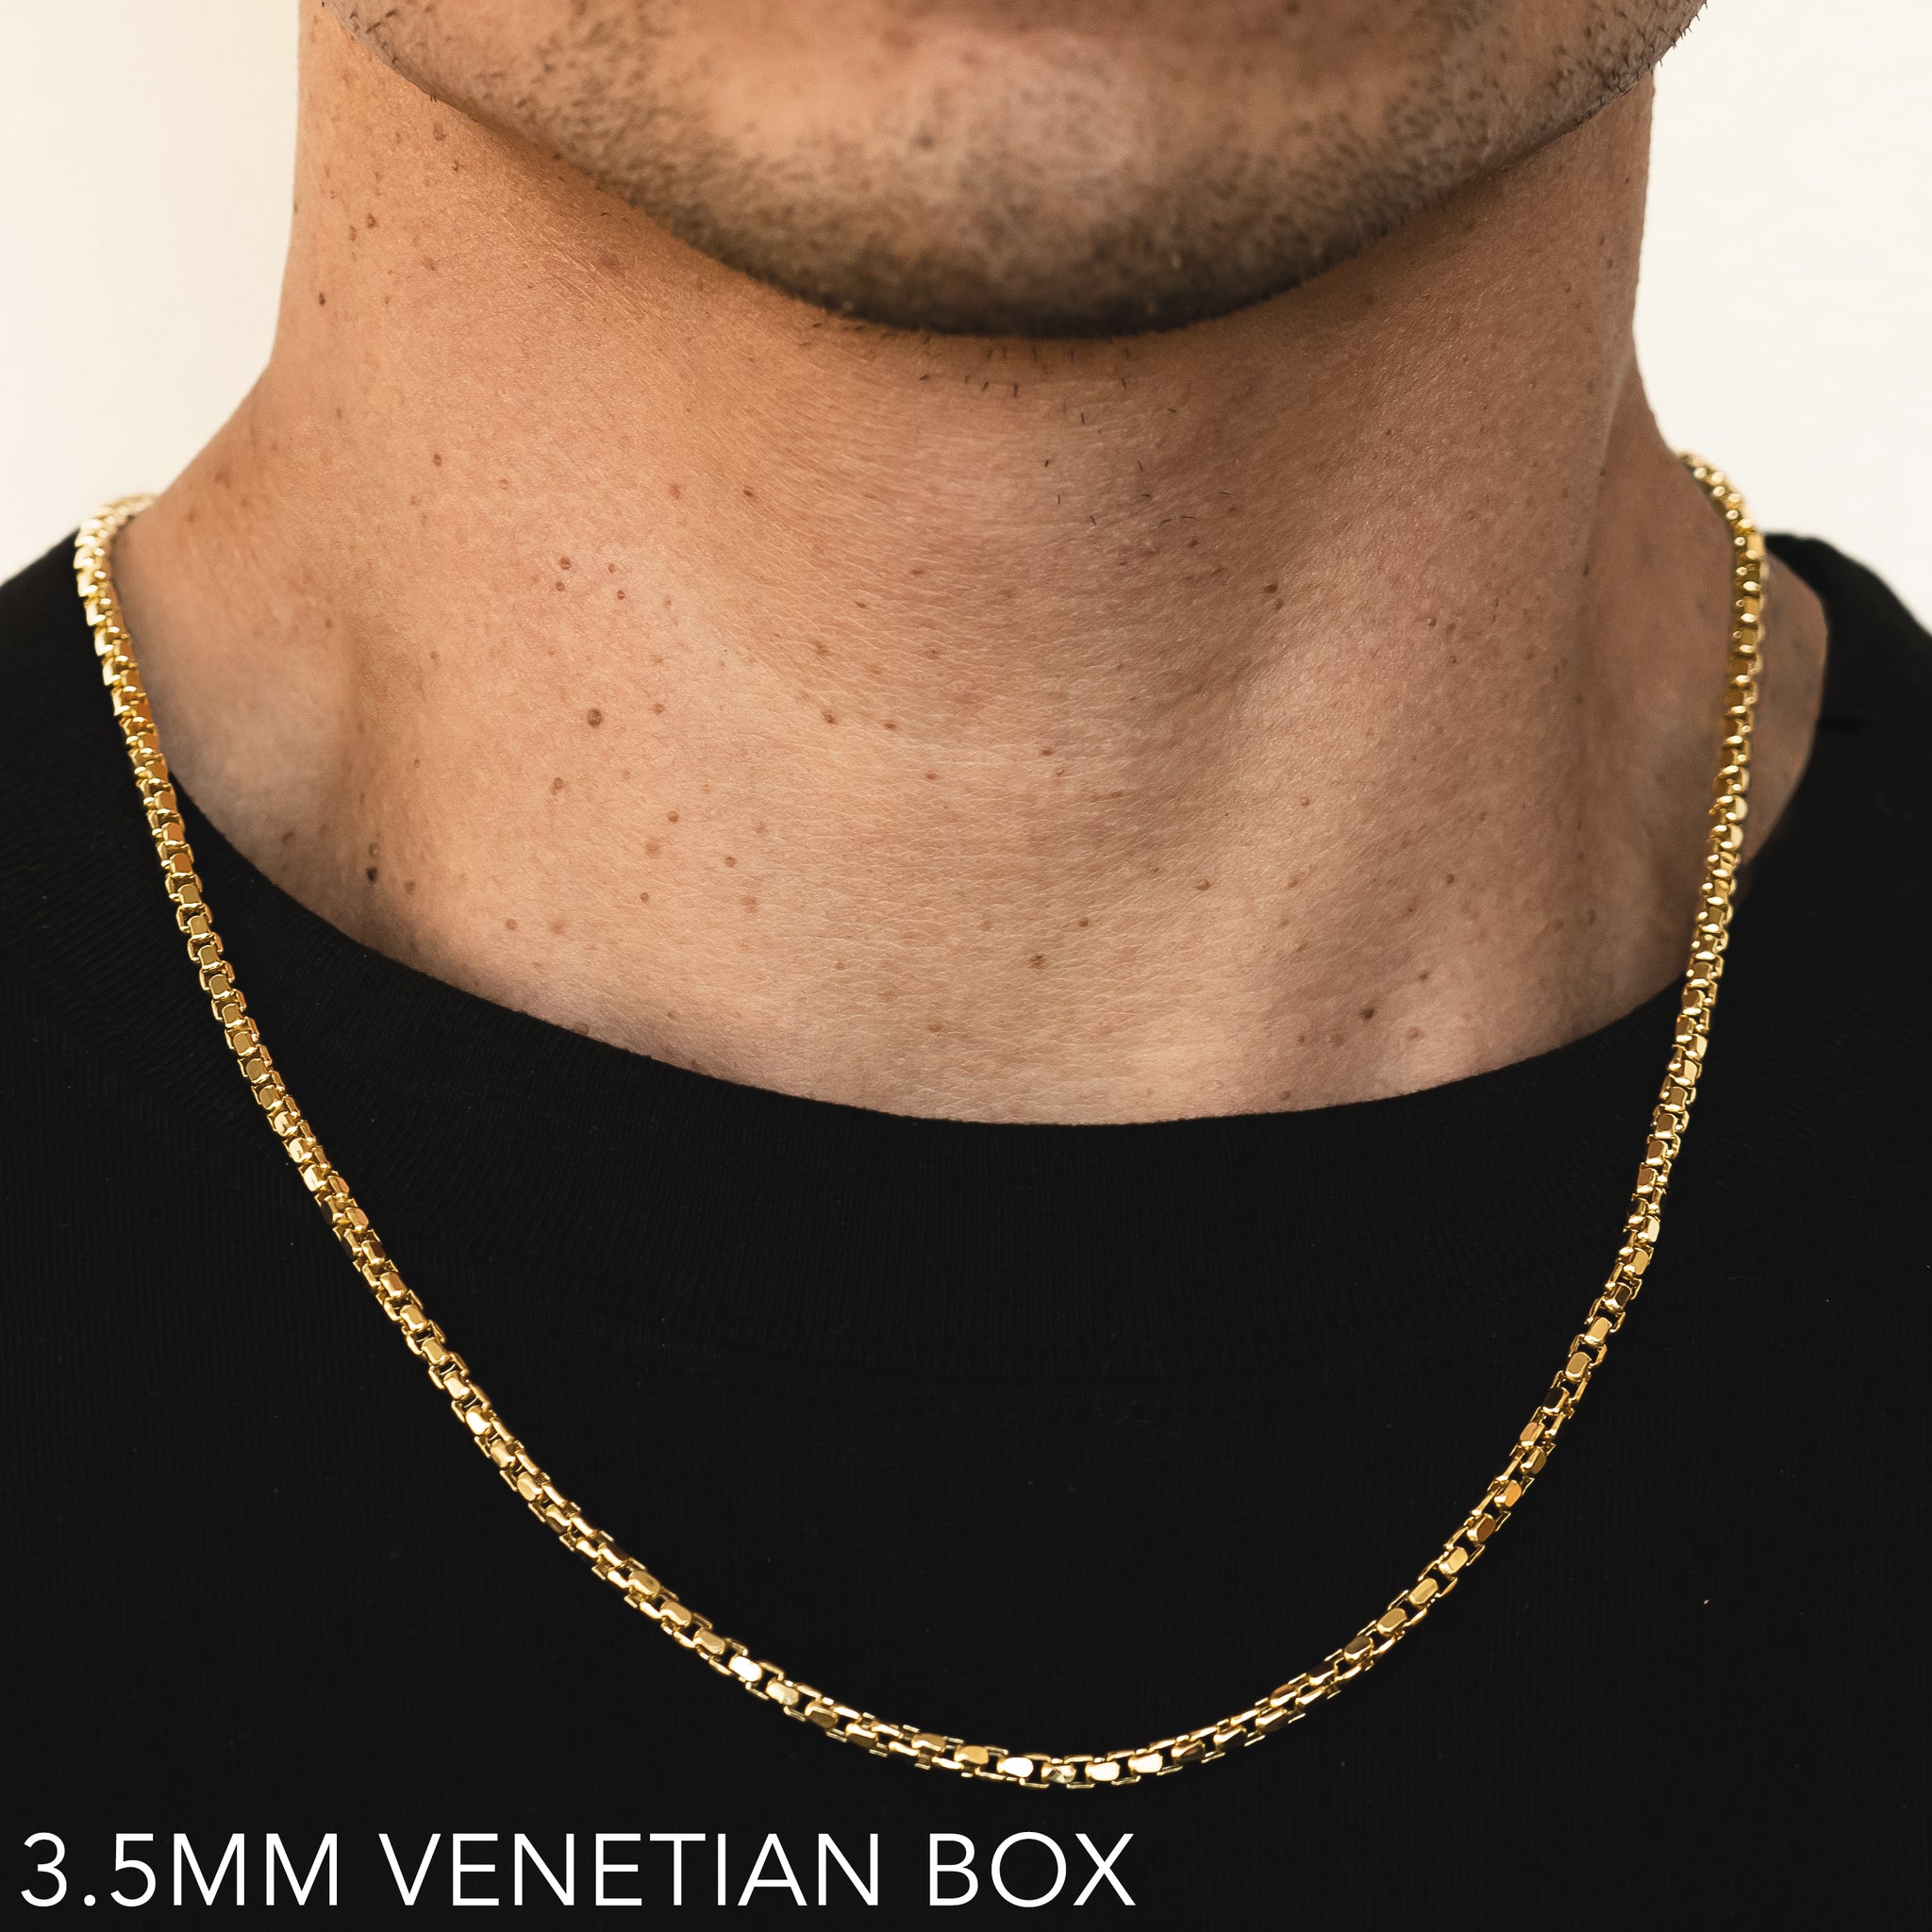 18K 3.5MM YELLOW GOLD SOLID VENETIAN BOX 22" CHAIN NECKLACE (AVAILABLE IN LENGTHS 7" - 30")